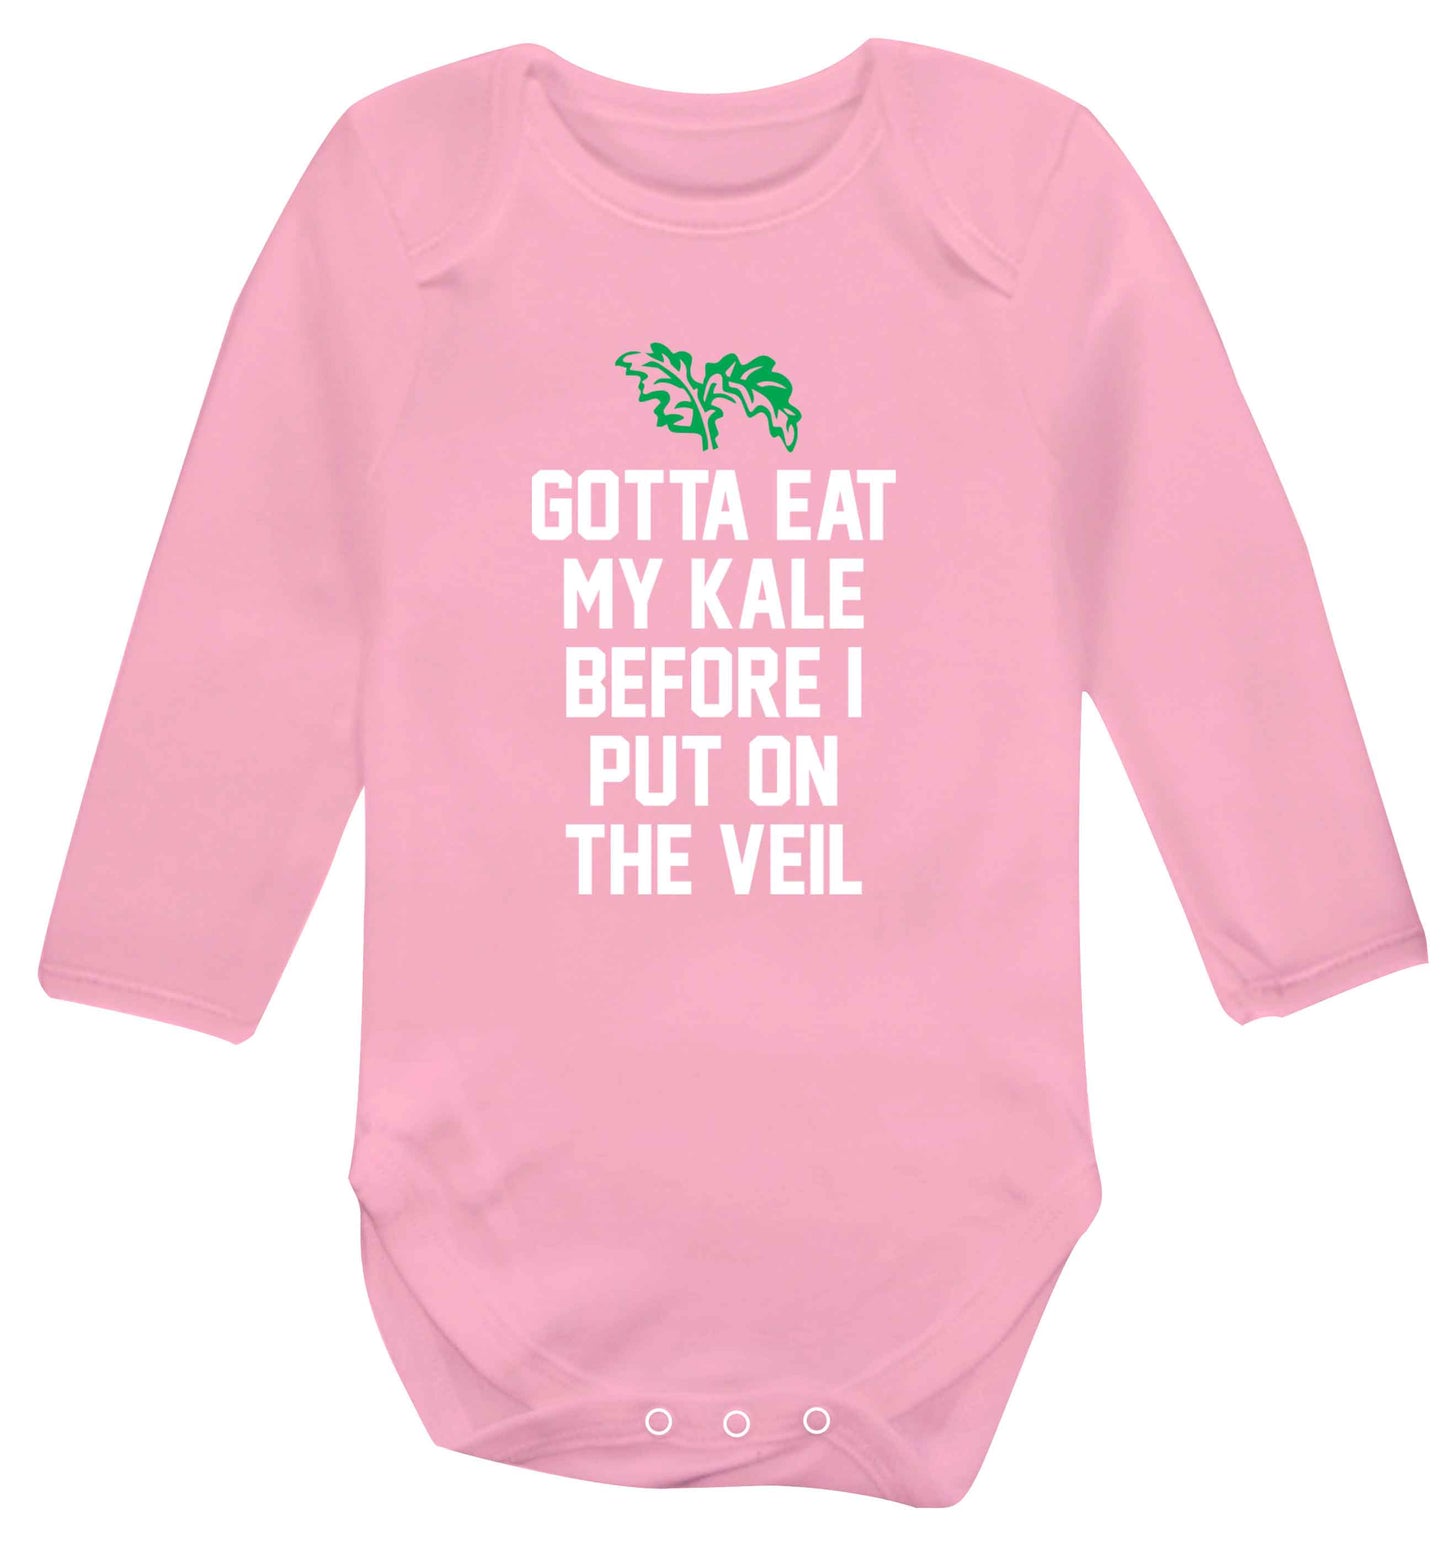 Gotta eat my kale before I put on the veil Baby Vest long sleeved pale pink 6-12 months